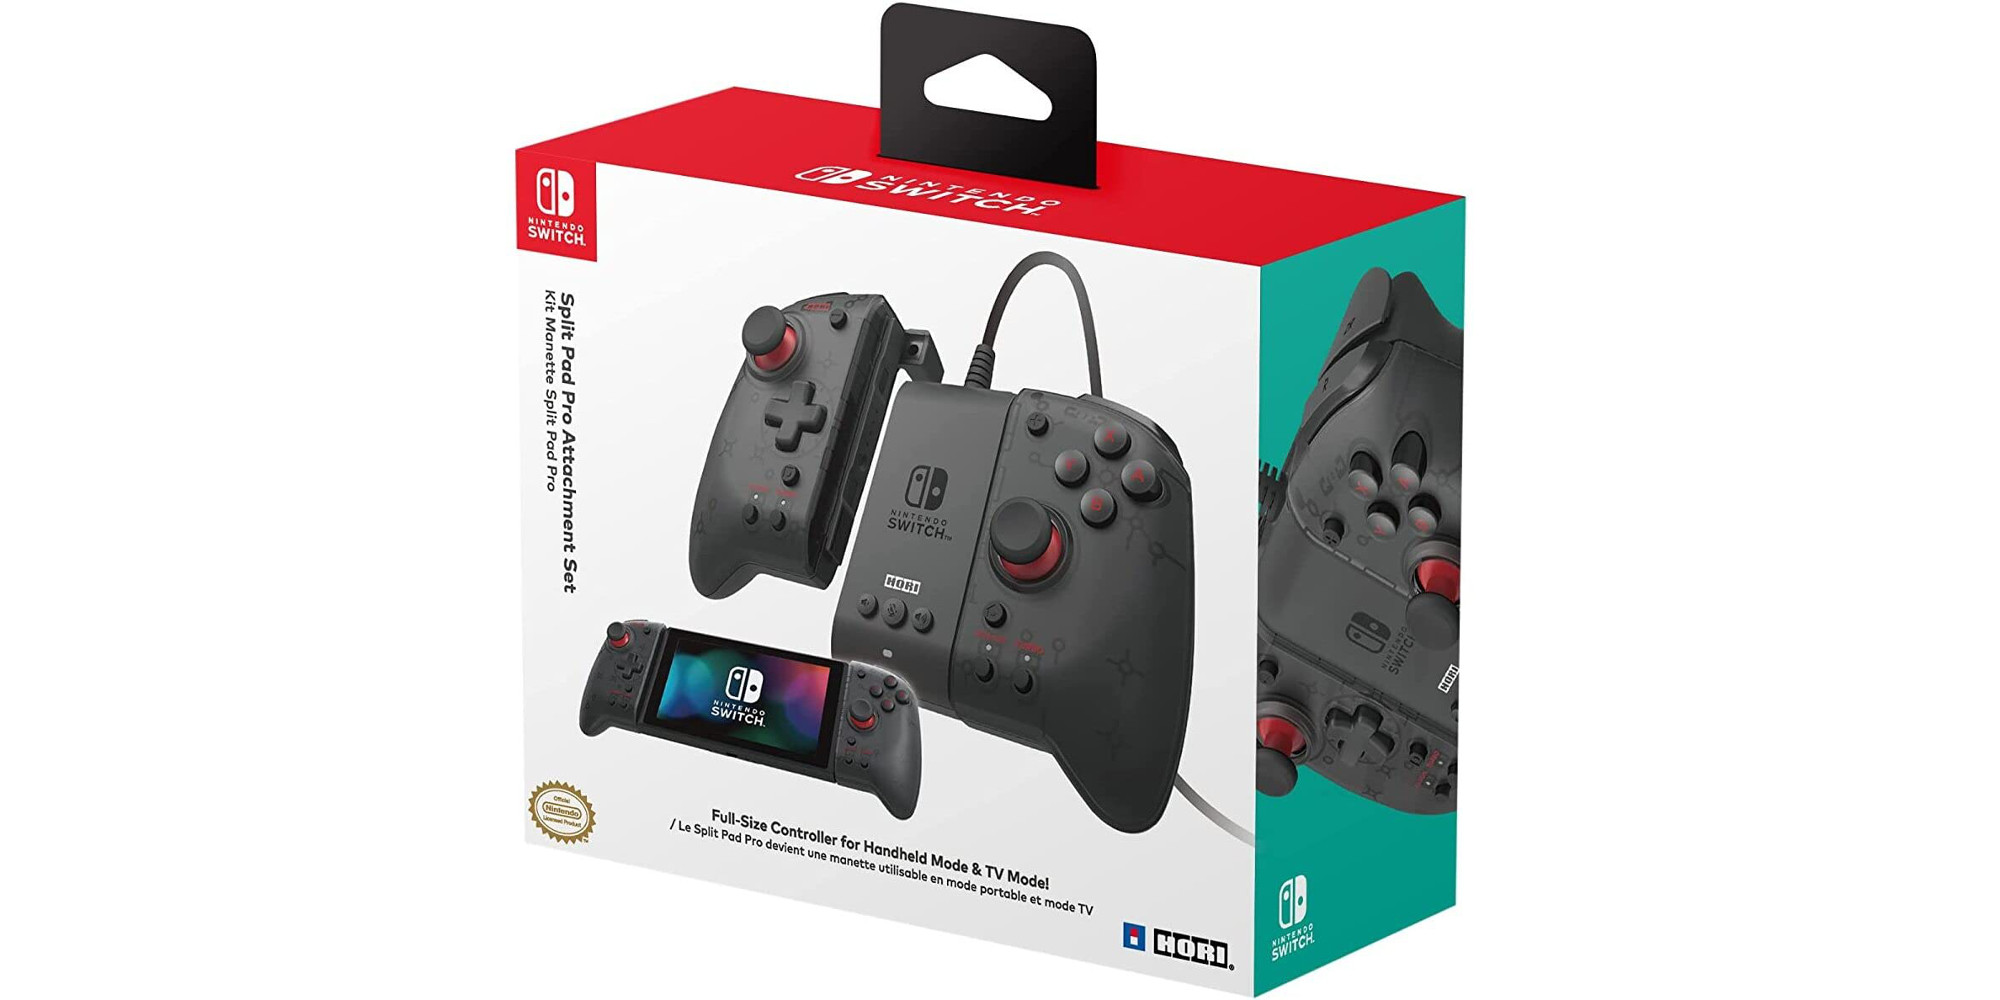 Customise your Nintendo Switch with these discounted Hori Split Pads